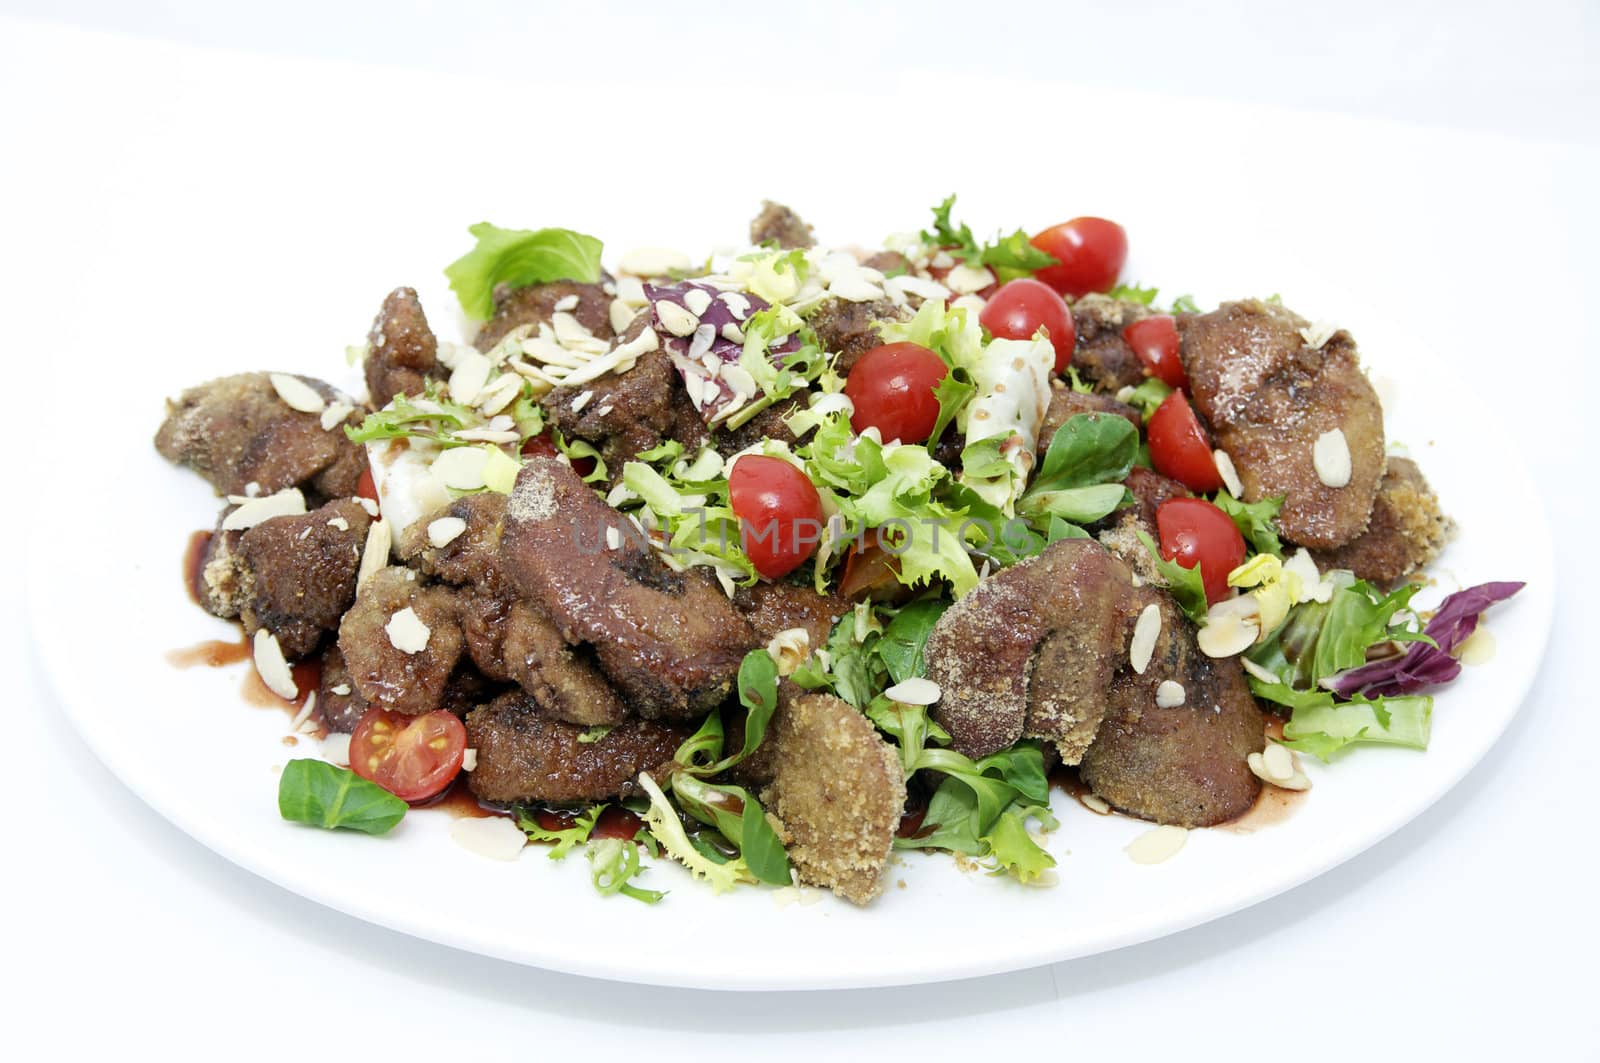 fried liver with vegetables on a plate on a white background